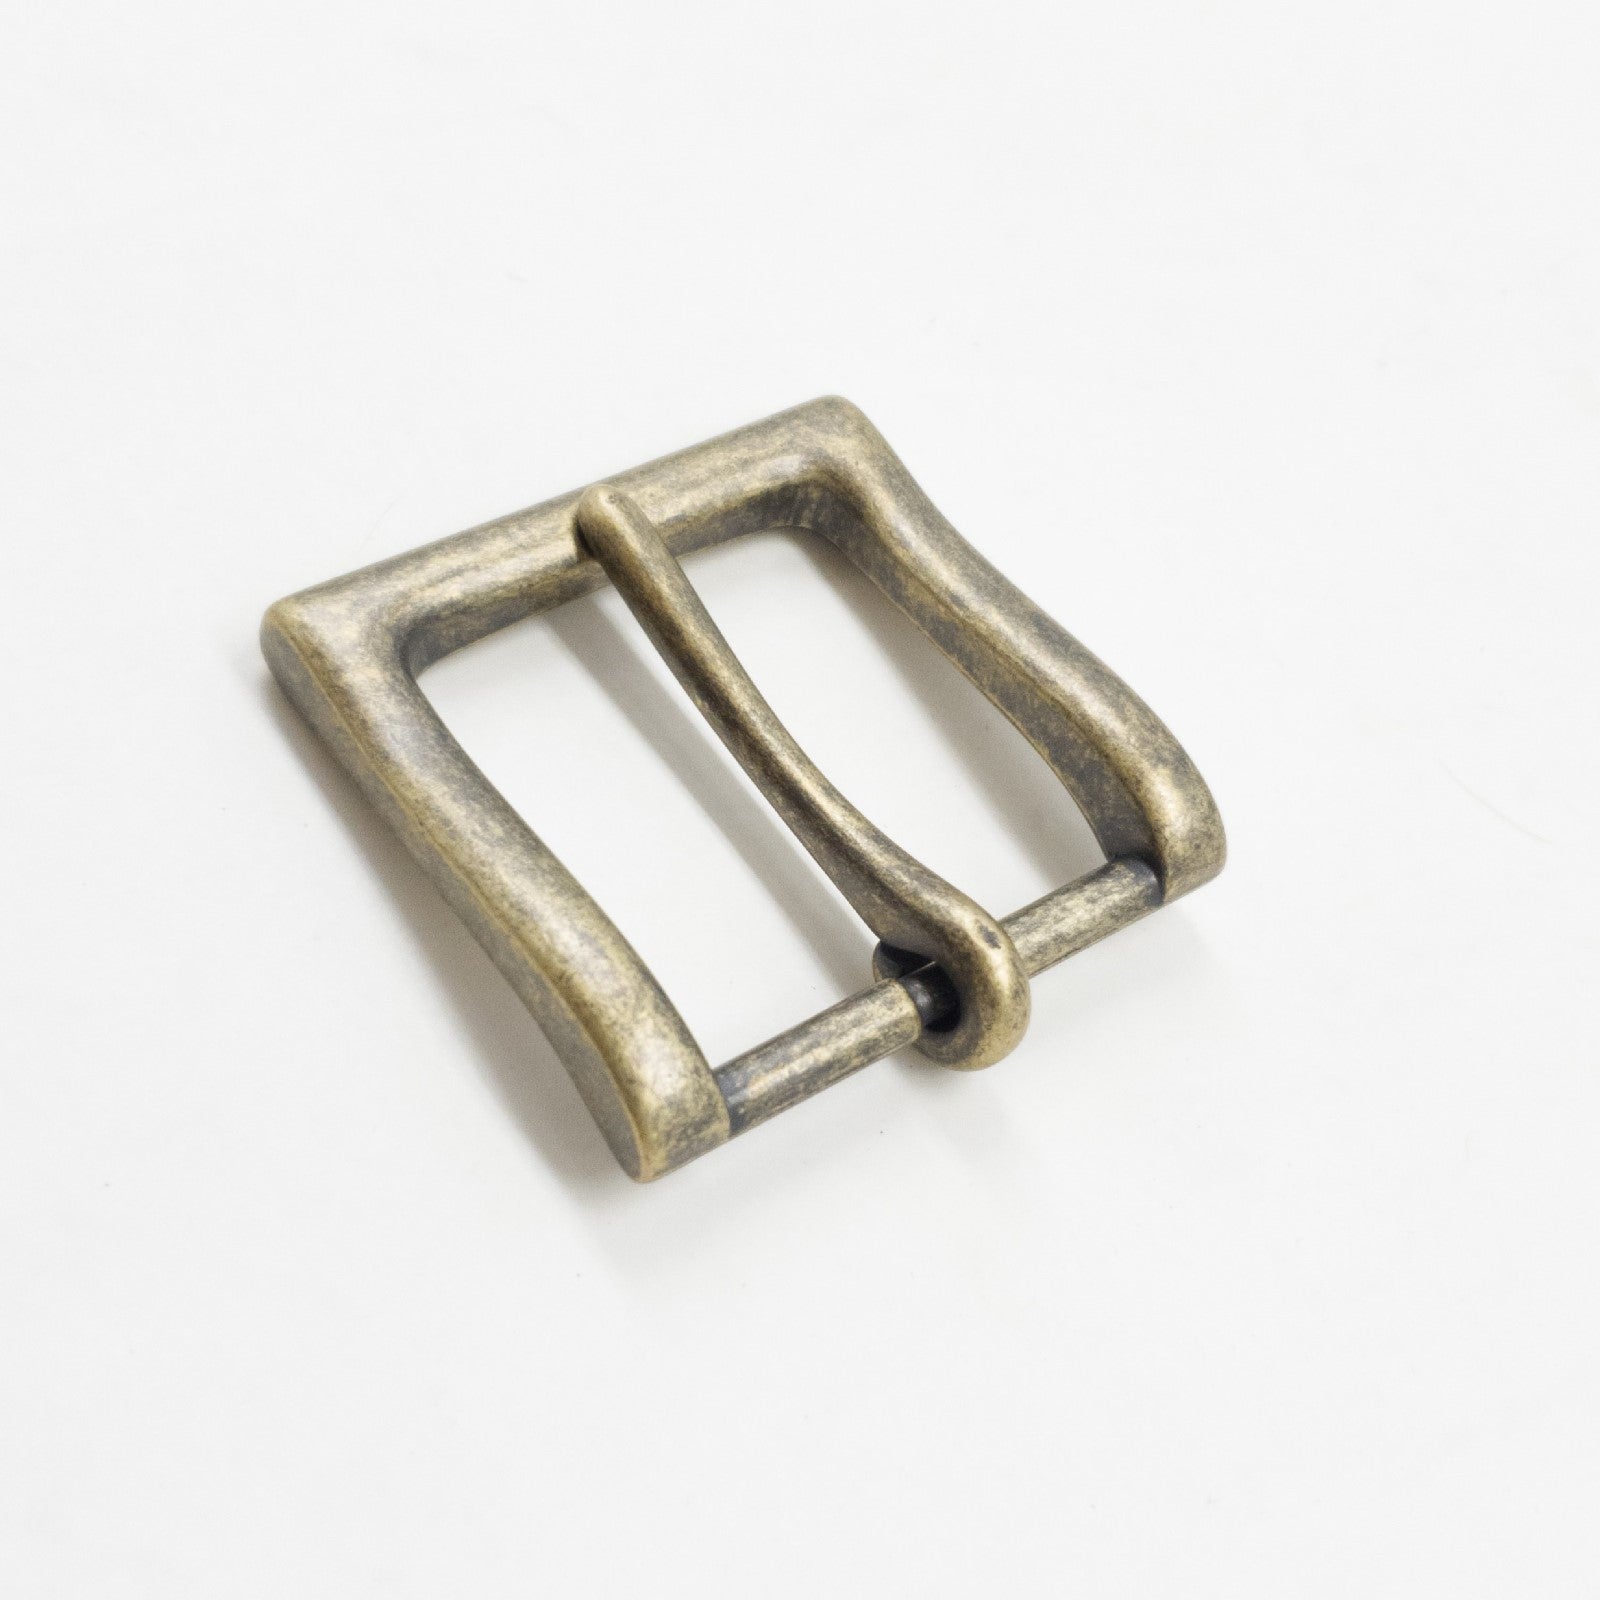 Belt Buckles 1.25" - 1.5" Hardware, 1 1/4" / Antique Brass | The Leather Guy